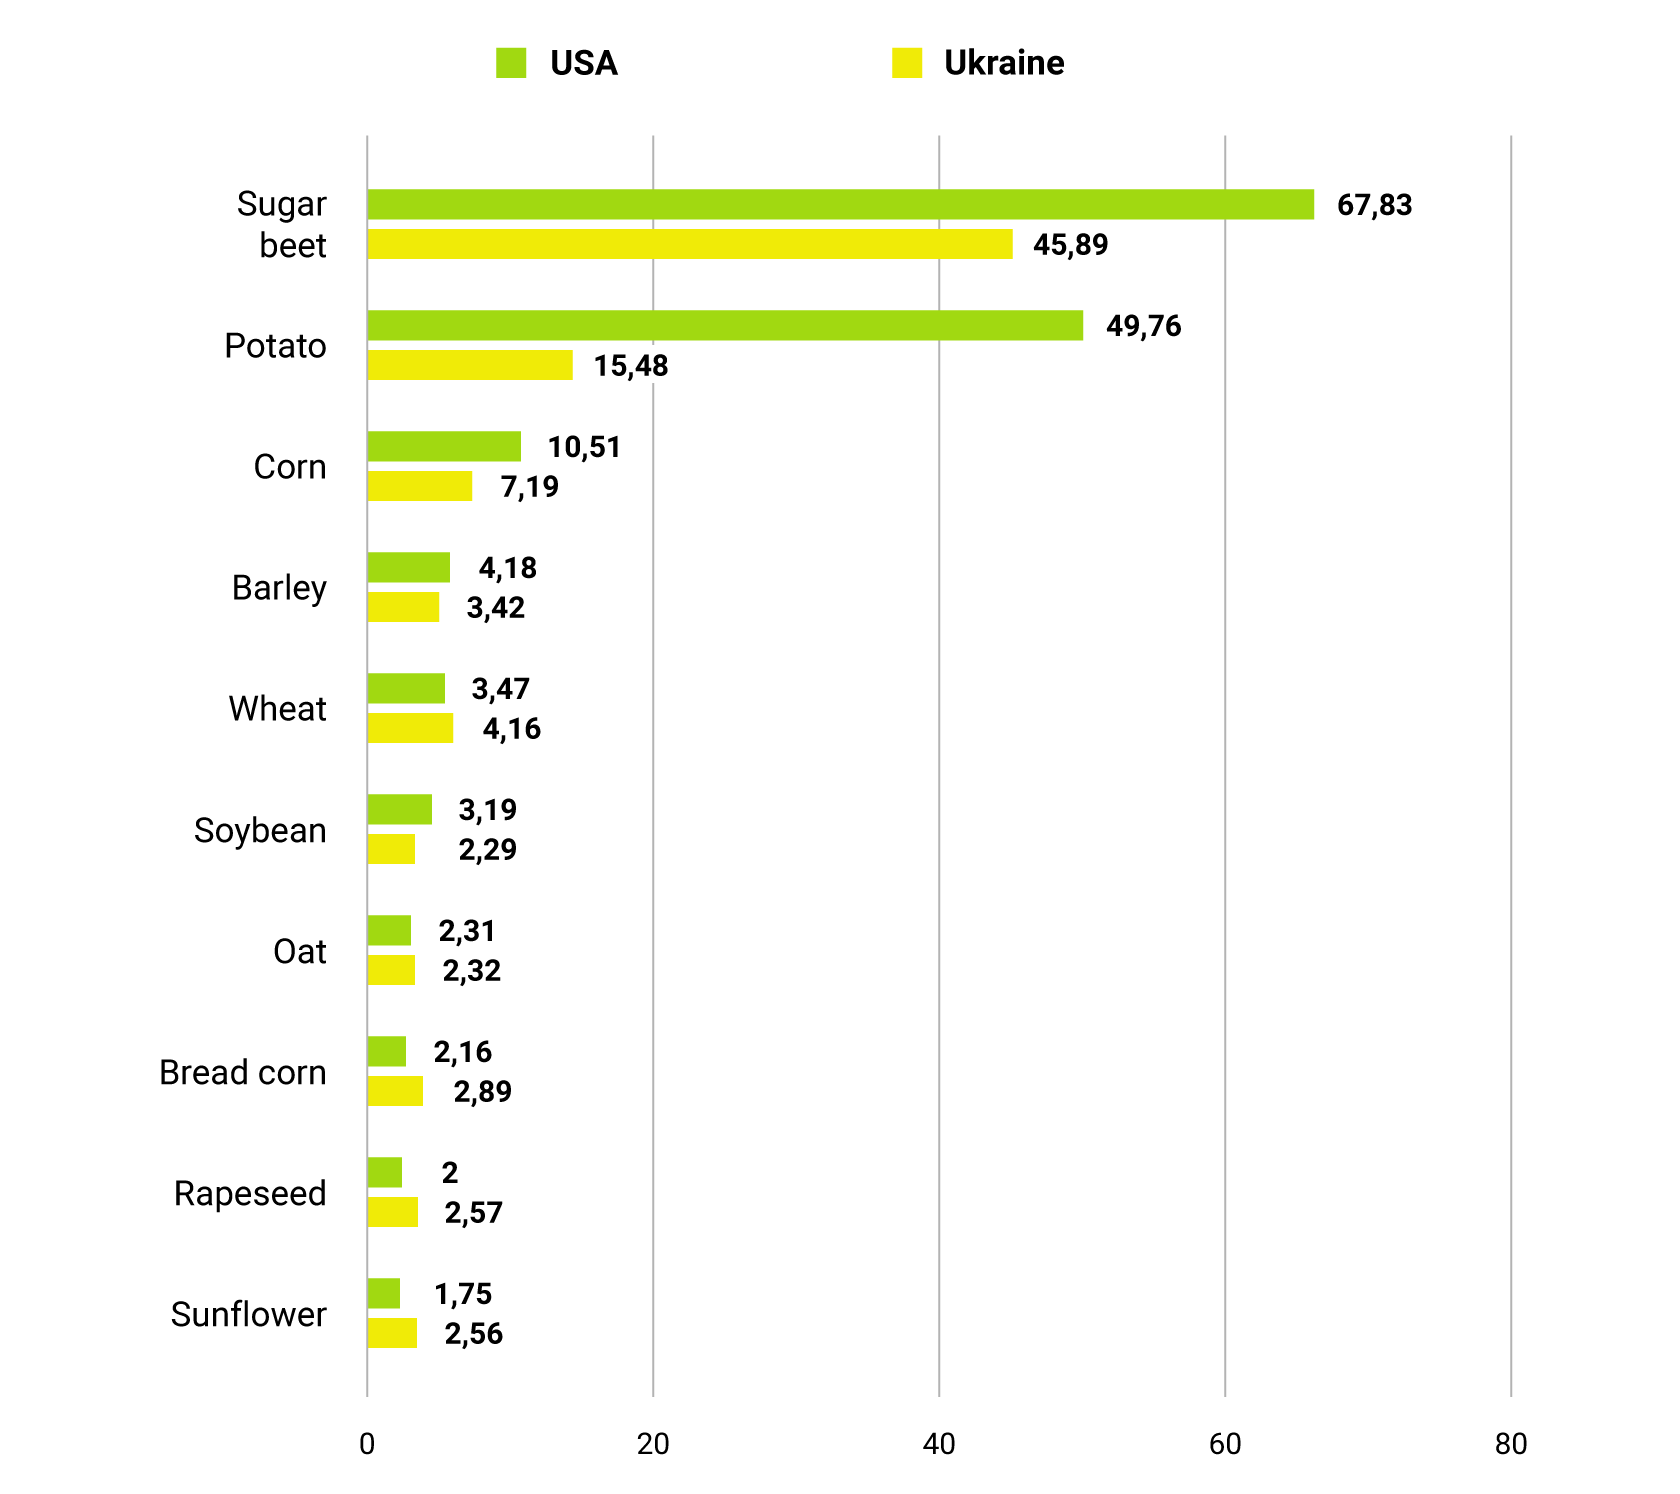 Comparison of the yield capacity of the main agricultural crops in the USA and Ukraine in 2019, t/ha